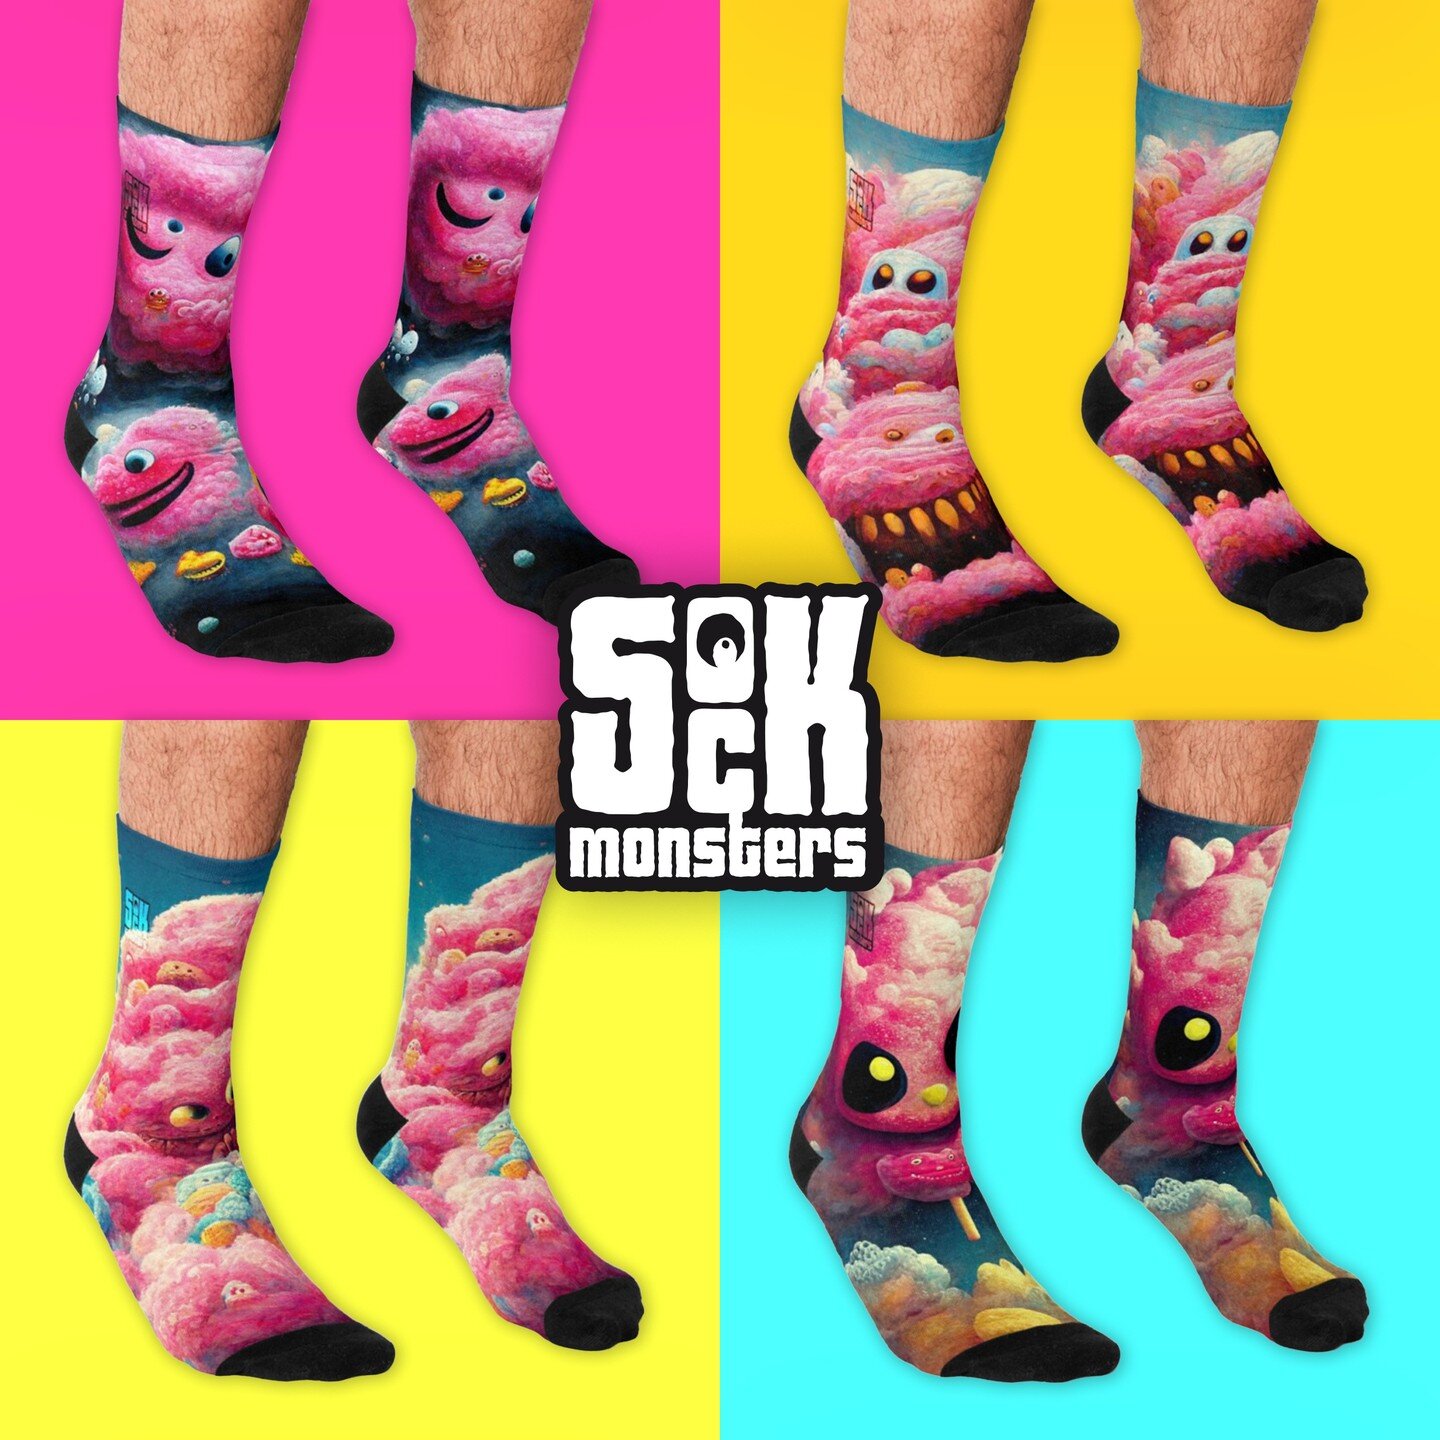 Fresh out of the candy dungeon, this odd bunch of Sock Monsters are ready to take to the streets! Get yours now and stride with pride, follow the link in my Bio.

Check out prints also available in my shop
https://redfishnz.redbubble.com/